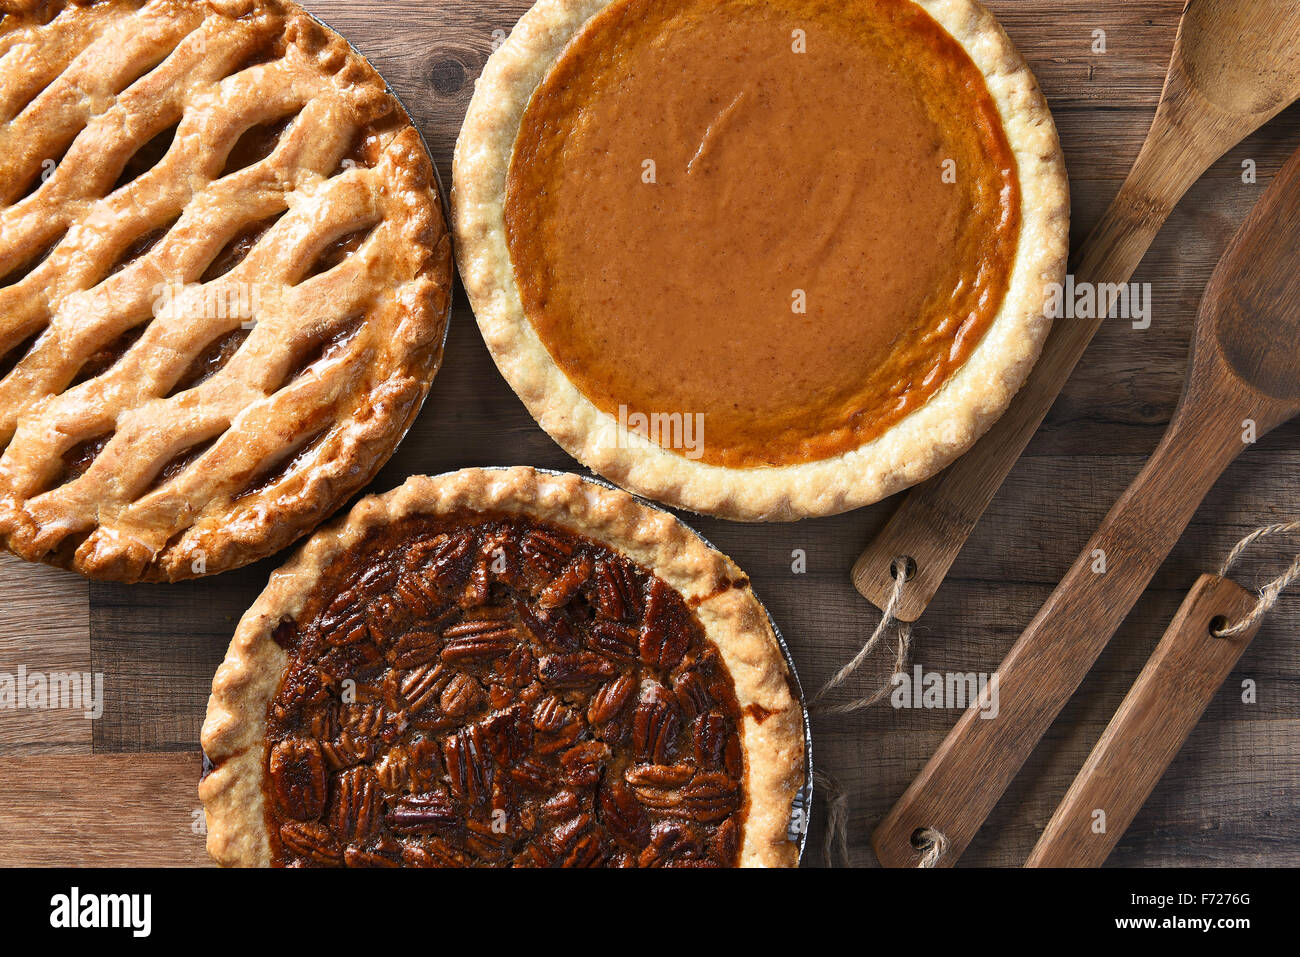 Overhead view of three pies for a Thanksgiving Holiday feast. Pecan, Apple and Pumpkin in horizontal format on wood table Stock Photo